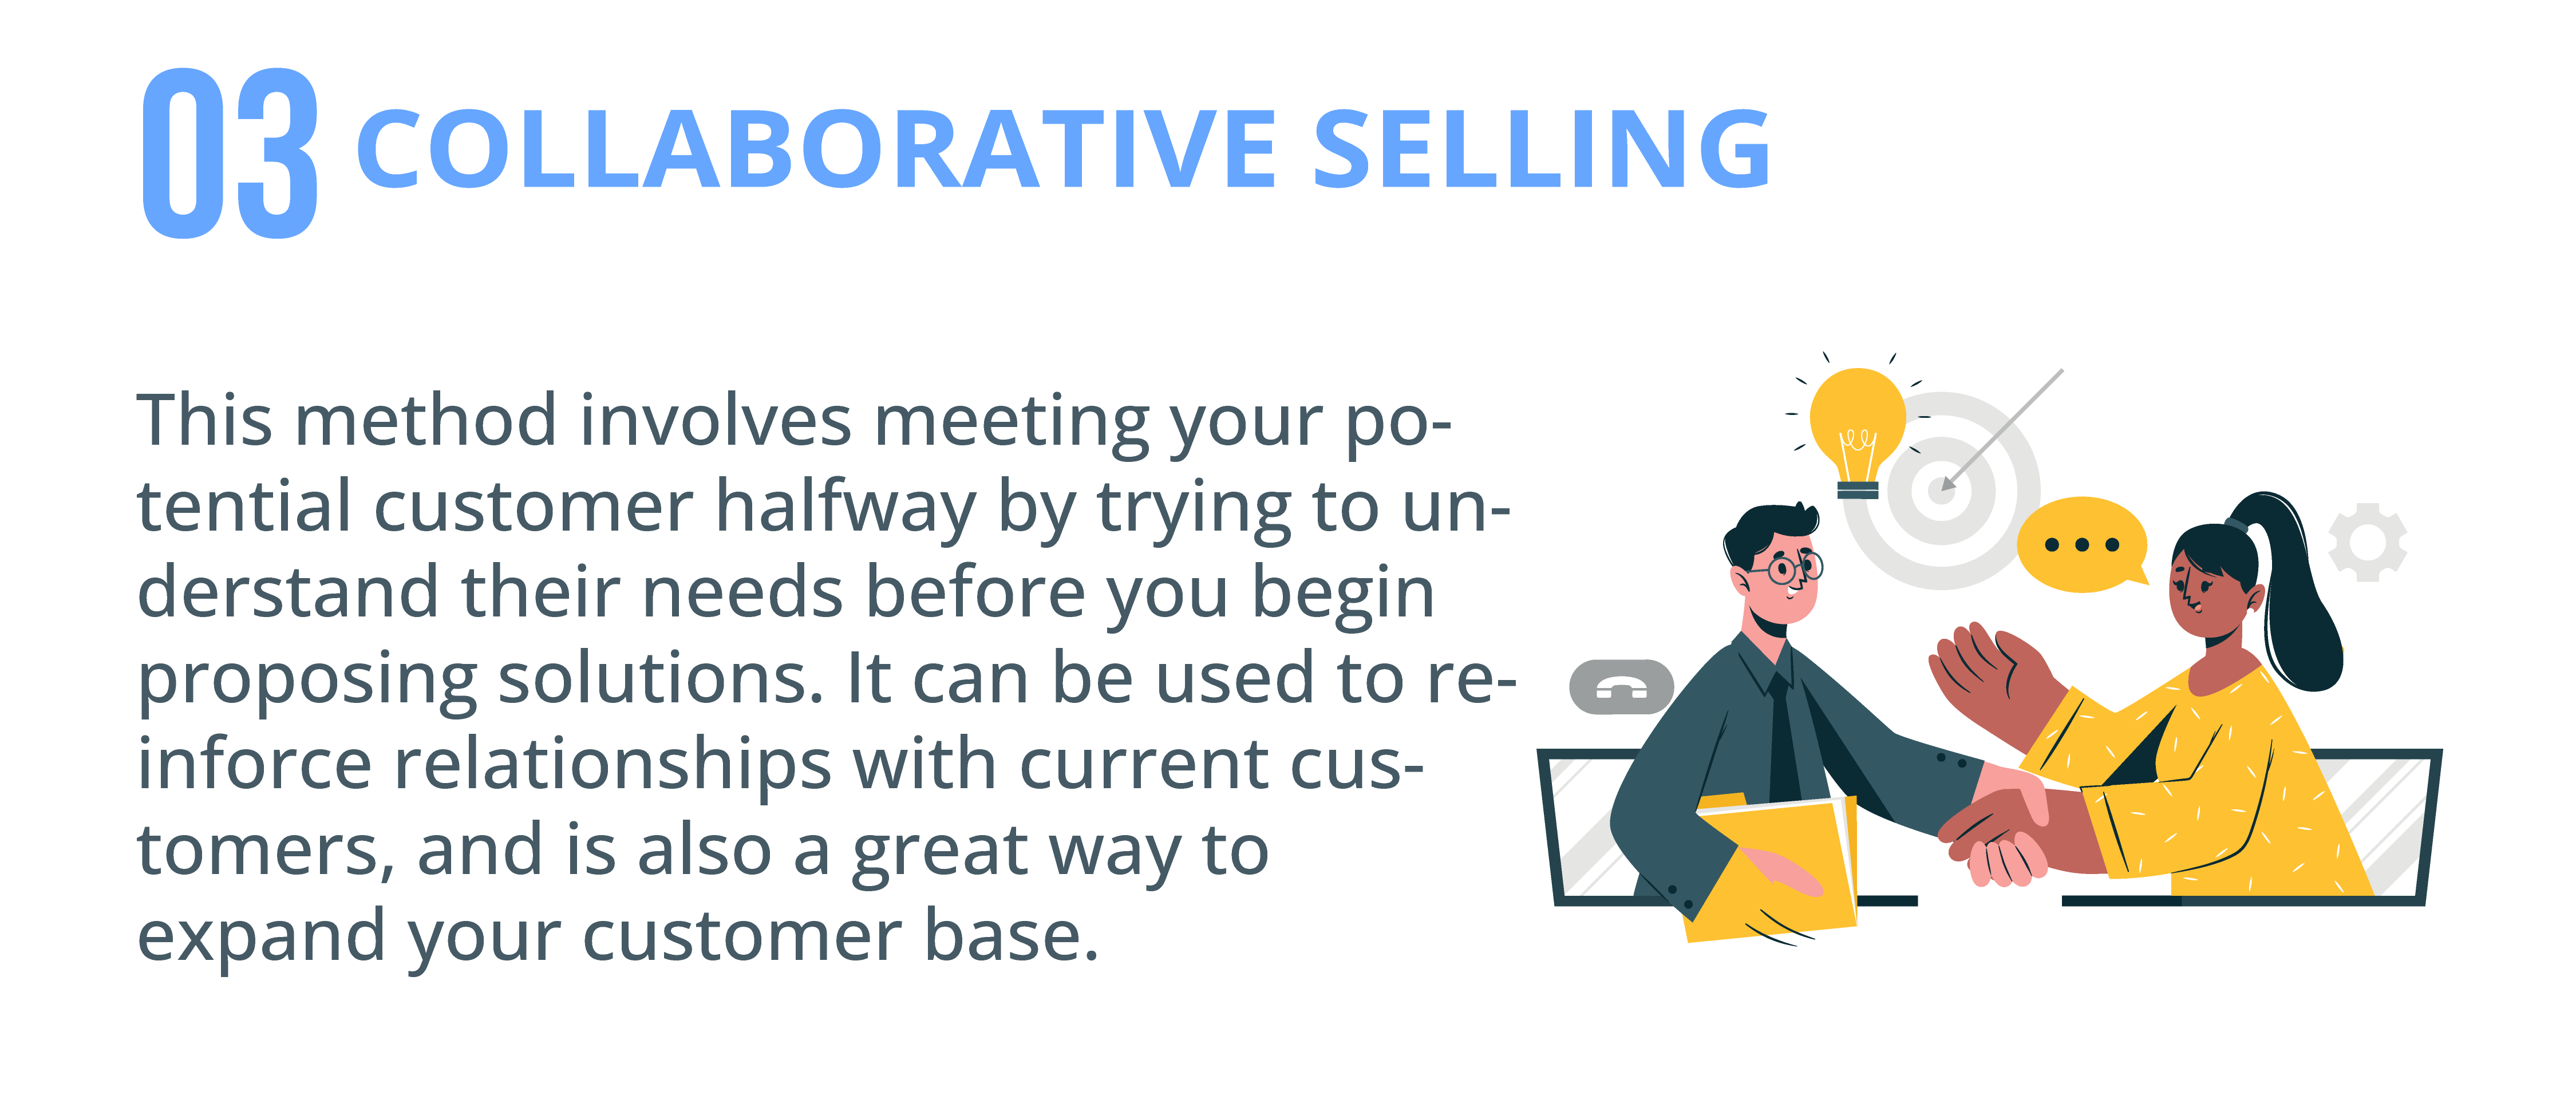 Collaborative Selling to strengthen Customer Relationships